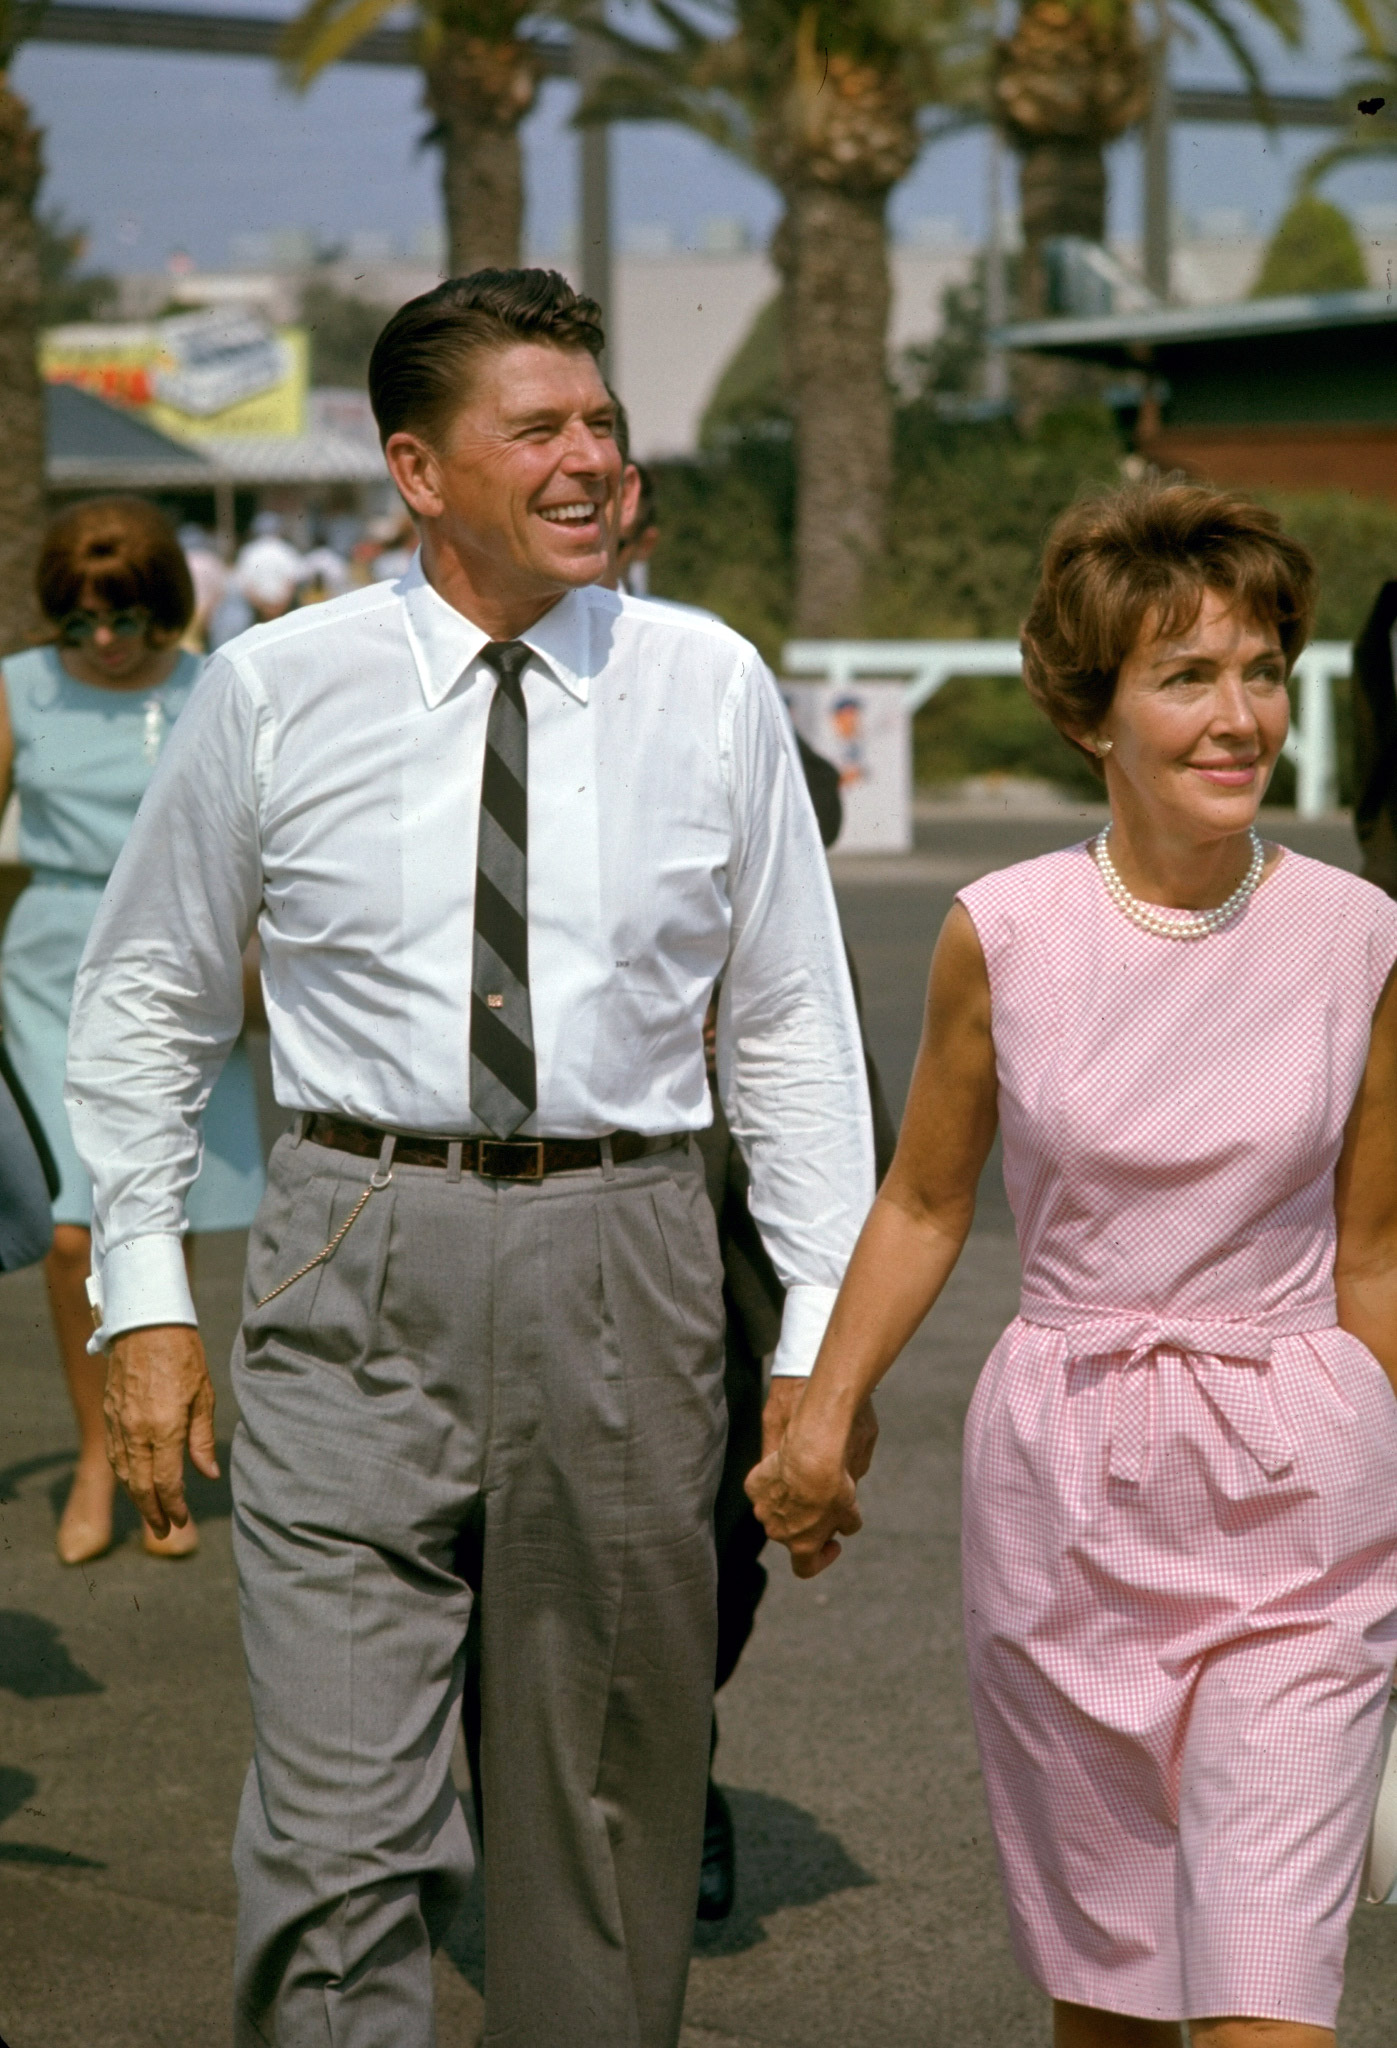 California gubernatorial candidate Ronald Reagan holding hands with wife Nancy while on the campaign trail, 1966.